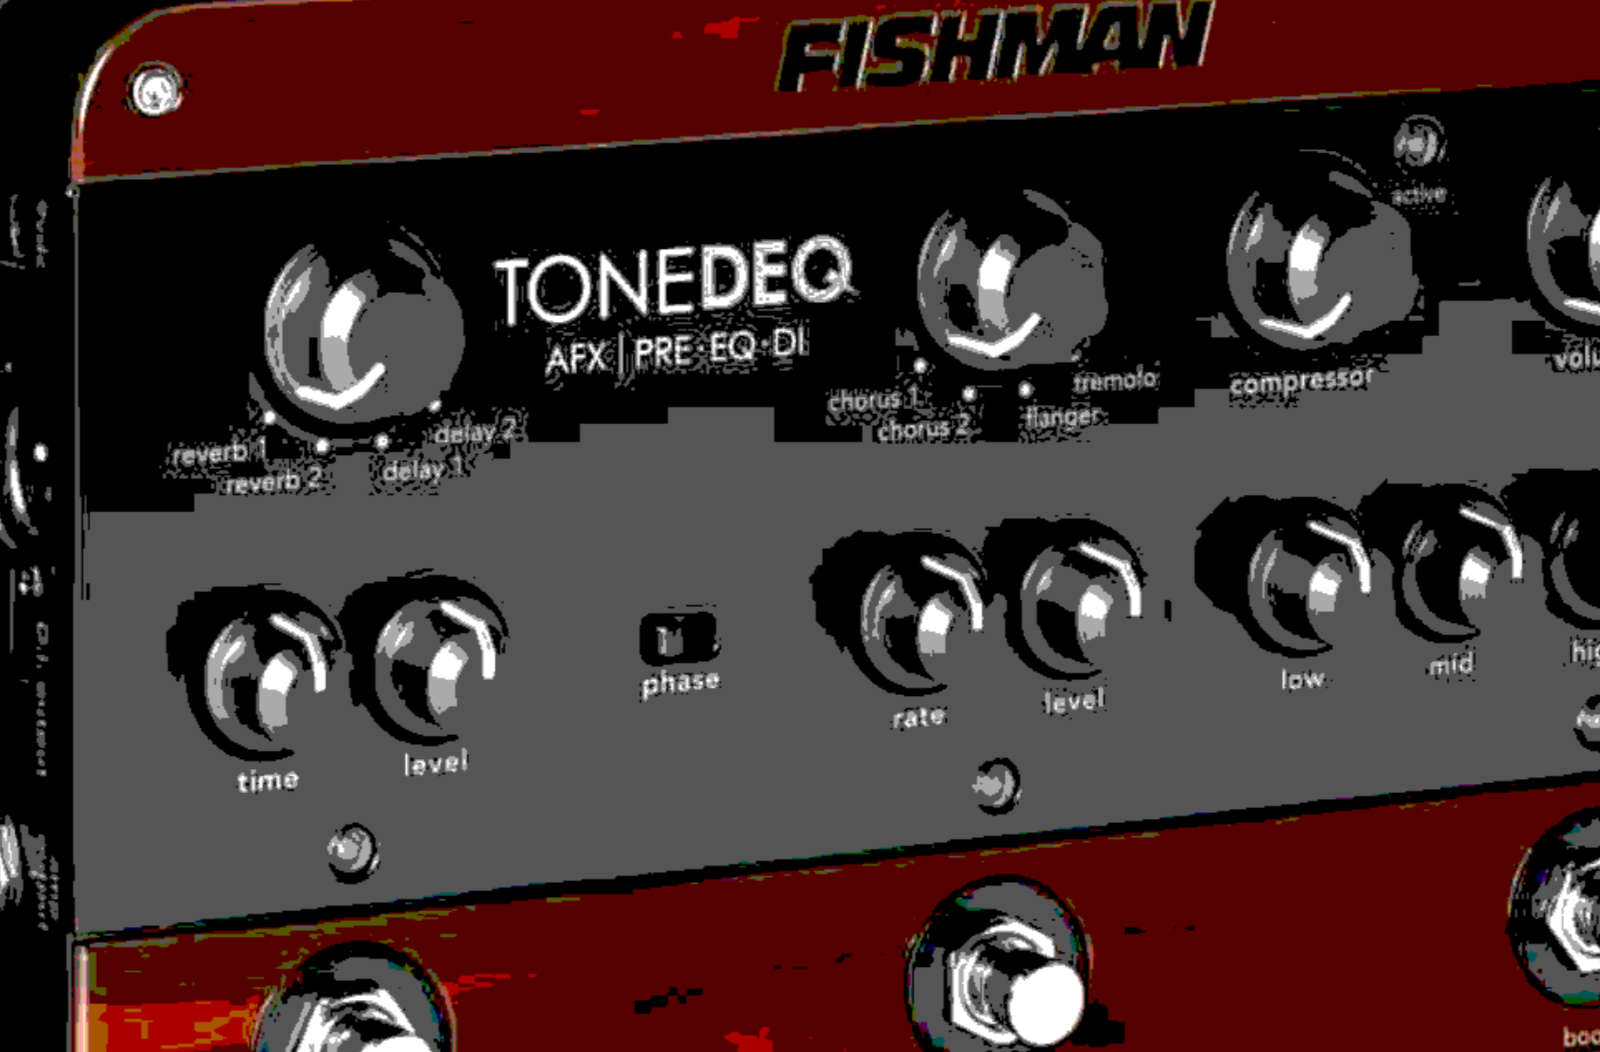 Know Your Product: Fishman Tone DEQ Acoustic FX Pedal